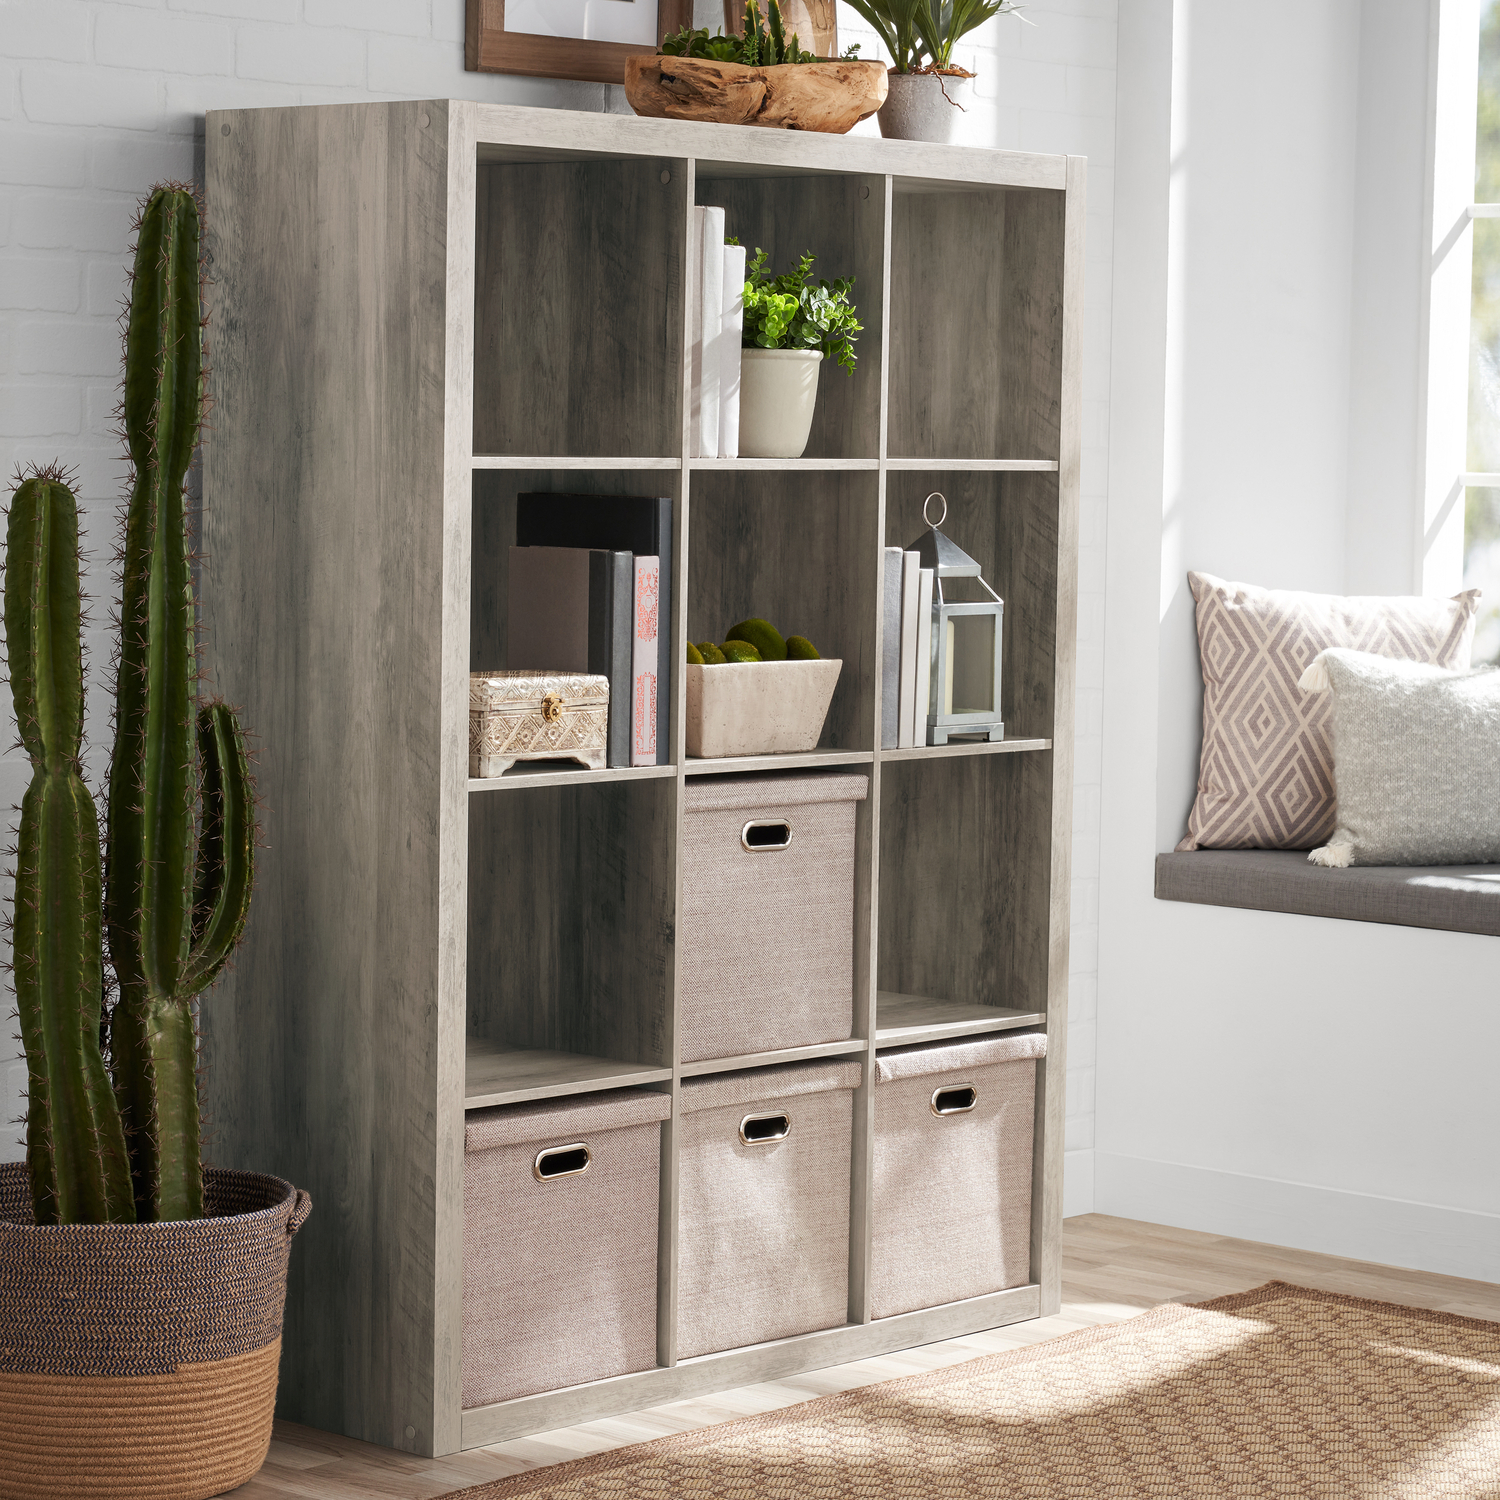 Better Homes & Gardens 12-Cube Storage Organizer, Rustic Gray - image 5 of 6